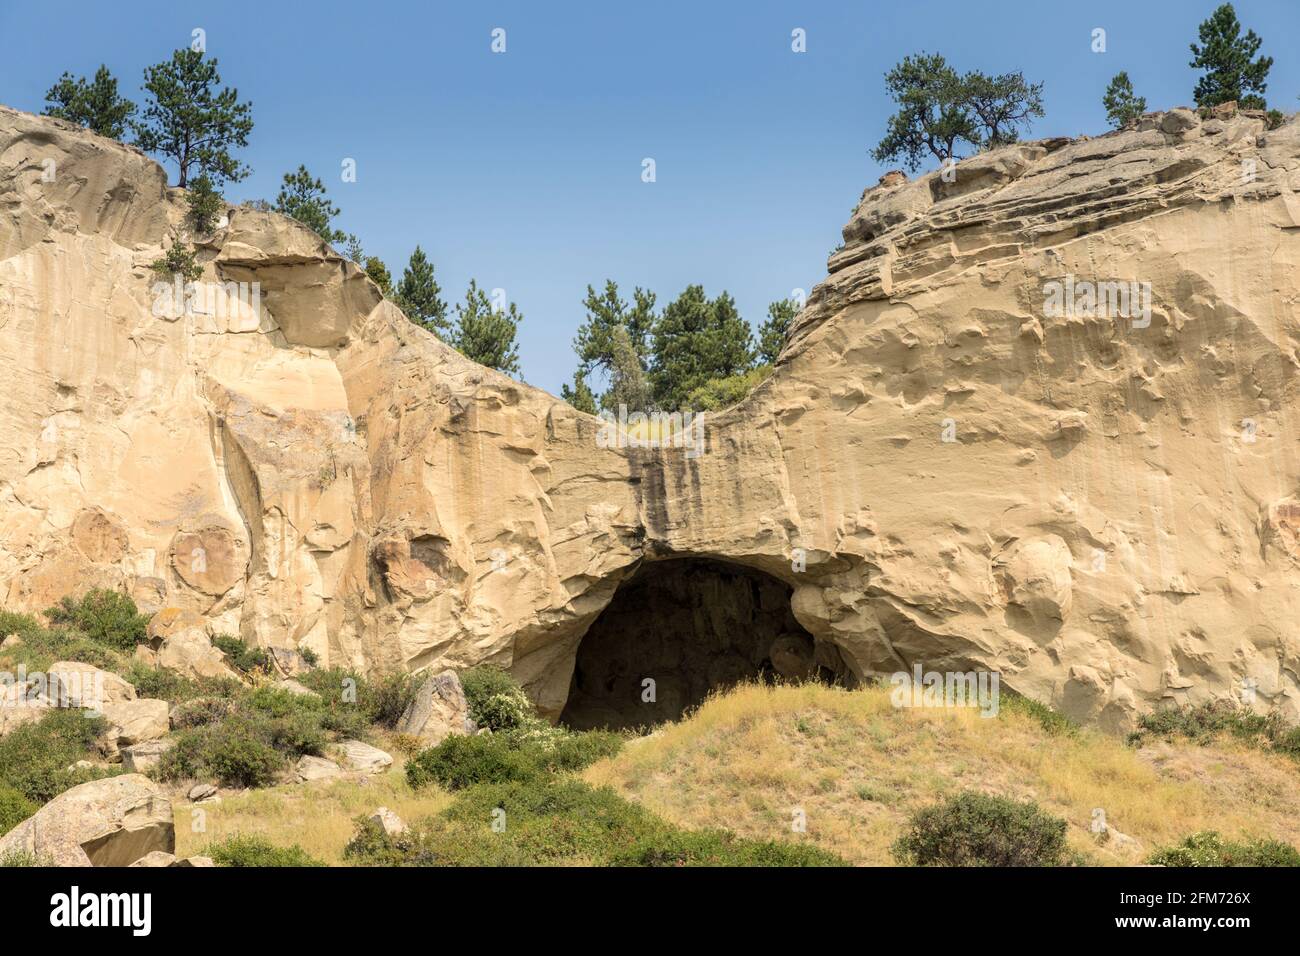 Pictograph Cave entrance, Pictograph Cave State Park, Billings, Montana, USA Stock Photo